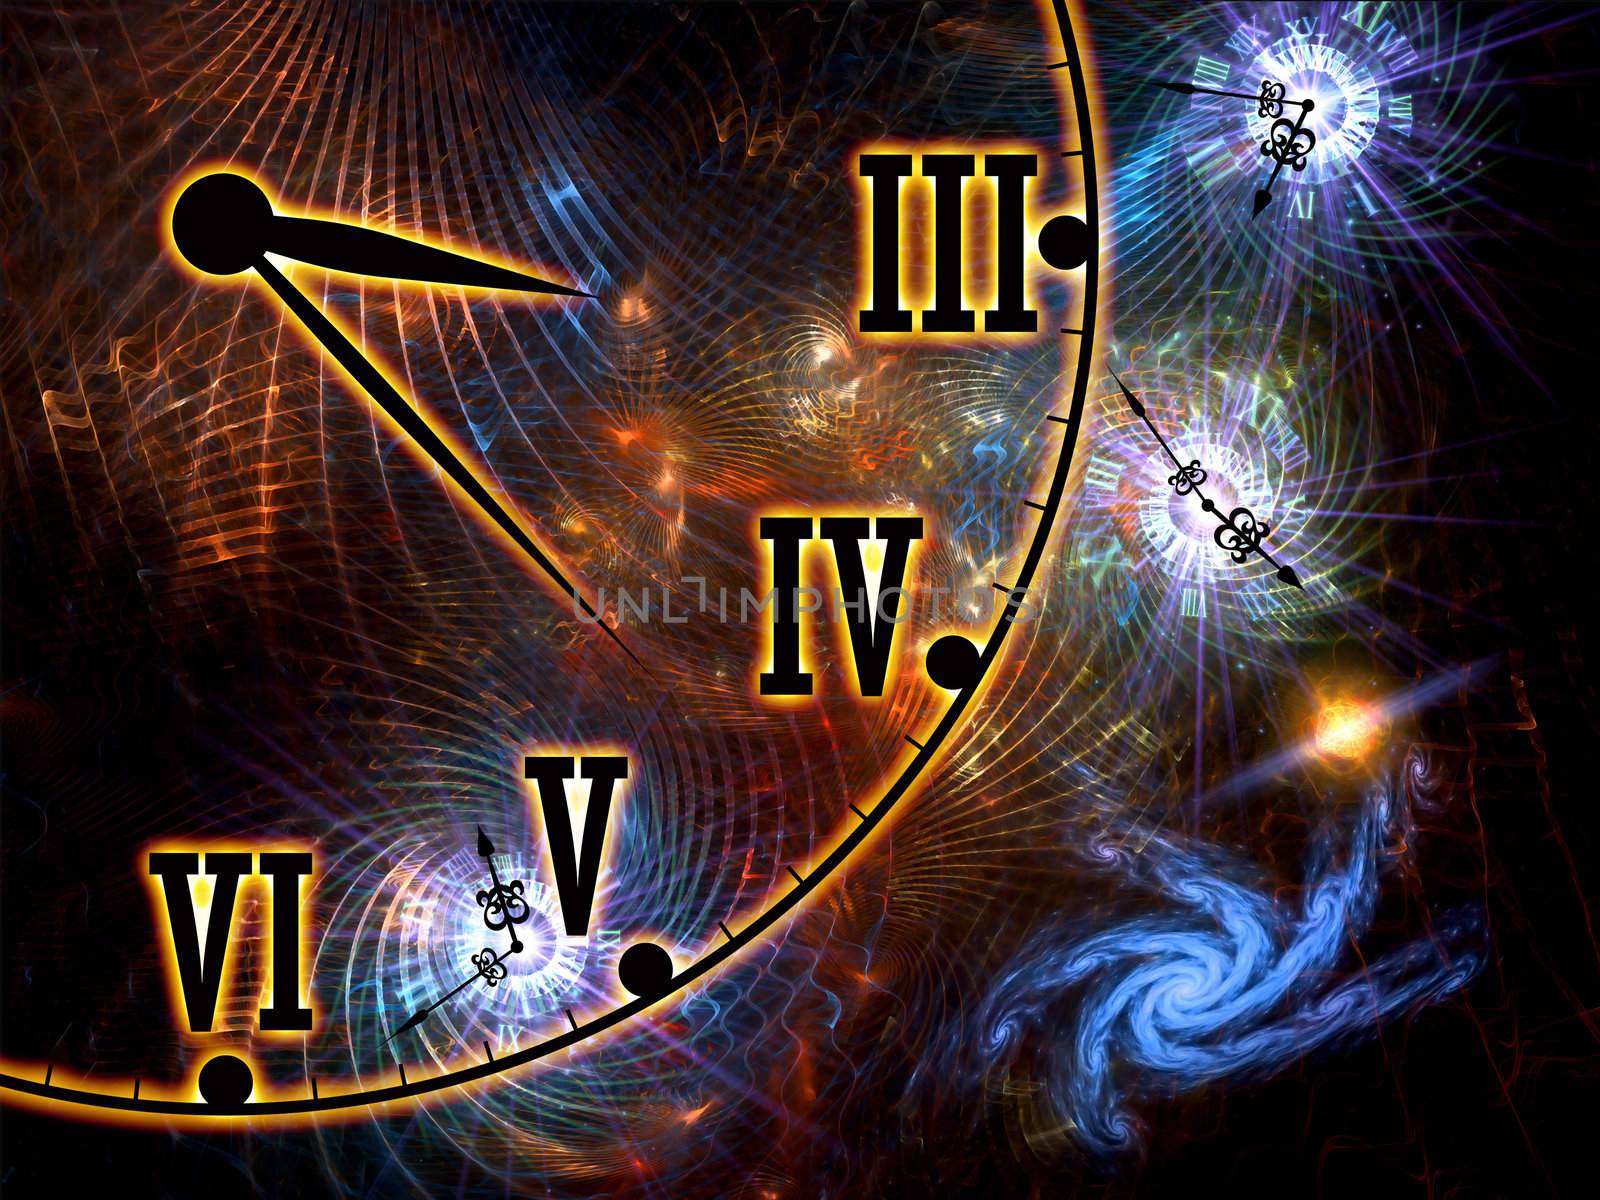 Interplay of time symbols, abstract forms and lights on the subject of space, time, relativity, cosmology, modern science and technology